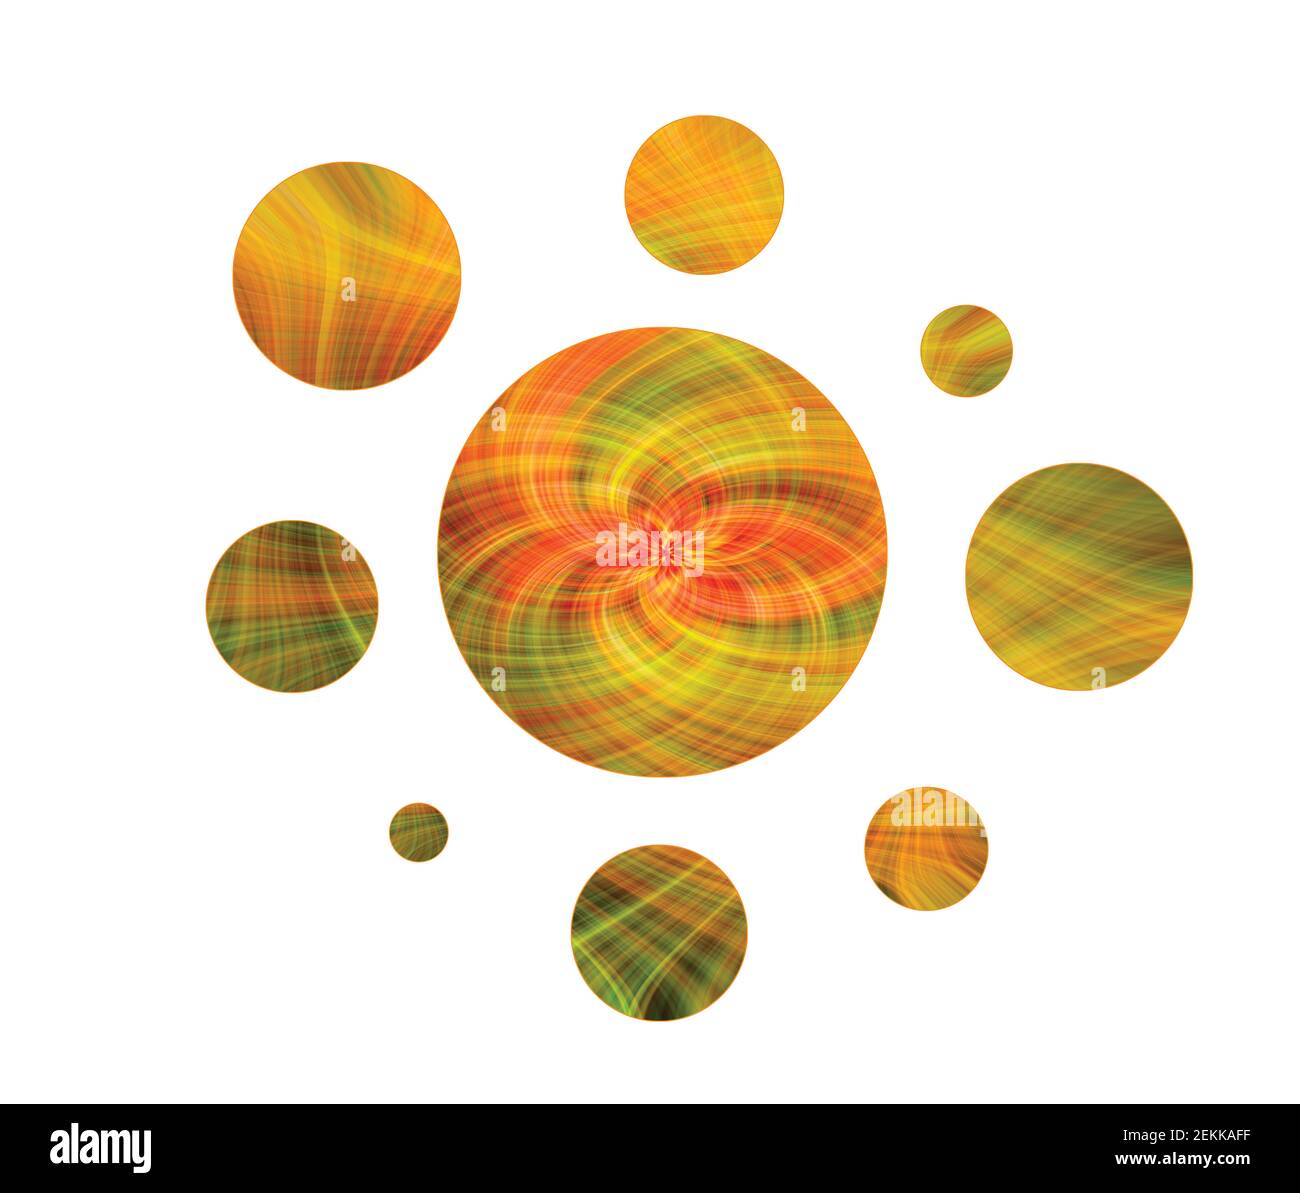 Concept design of earth colours on planets. circluating a central 'earth' planet. Stock Photo